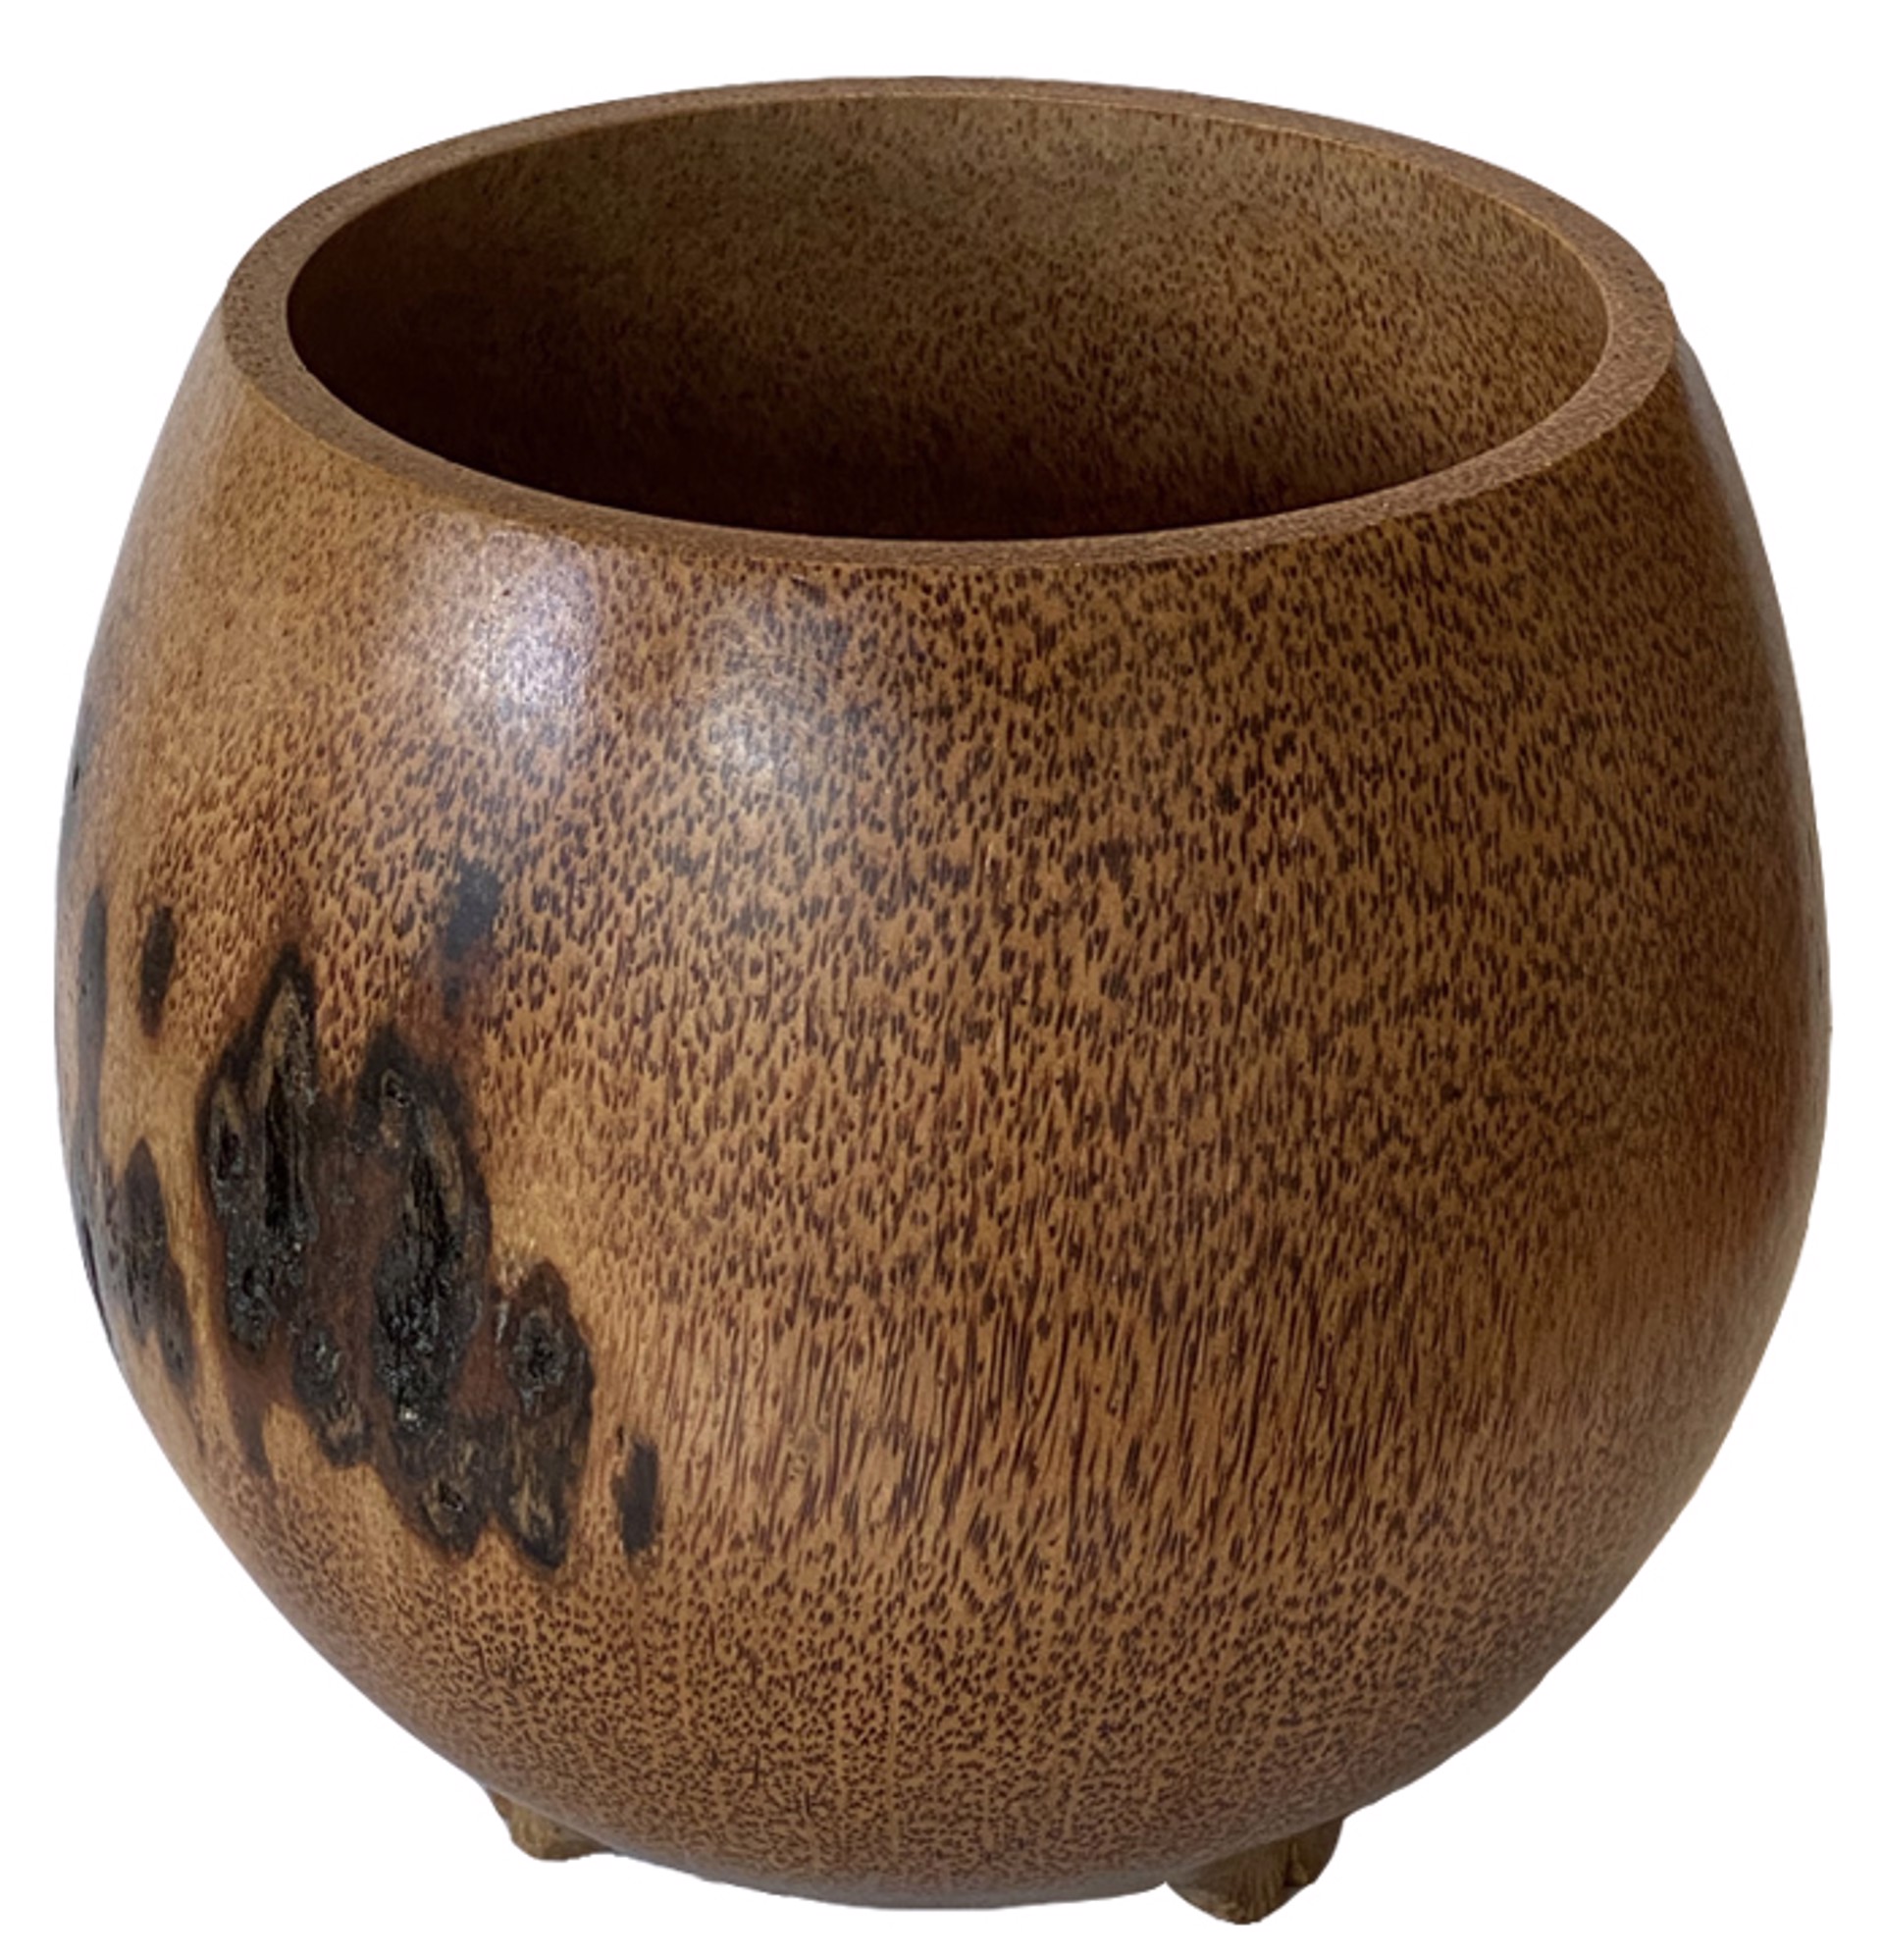 Spiked Coconut Deep Bowl with Feet by John Fackrell